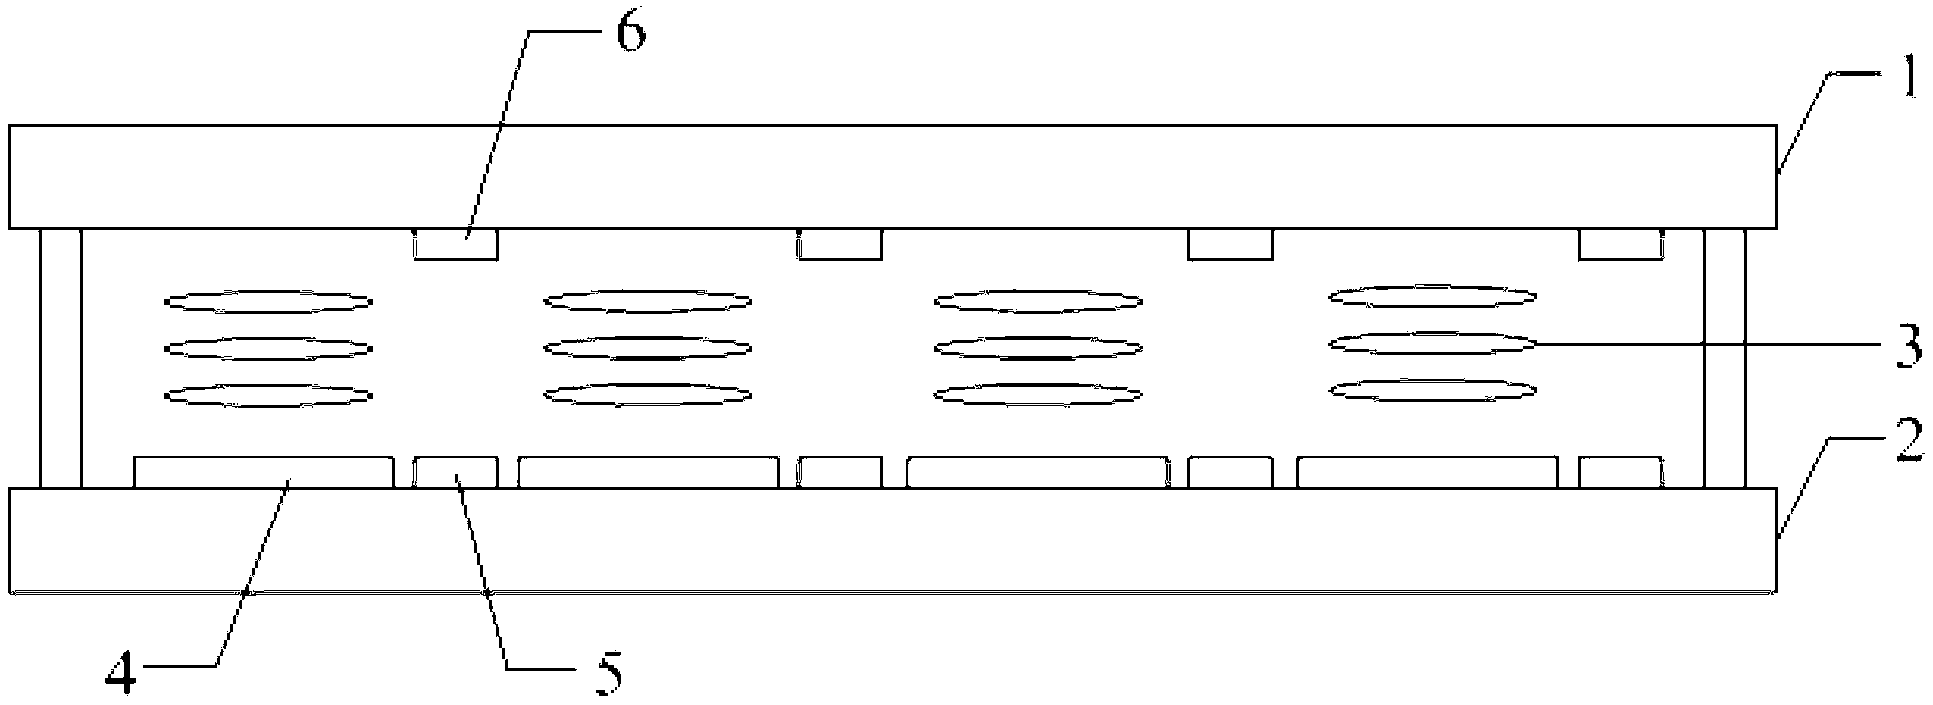 Capacitive embedded touch screen and display device